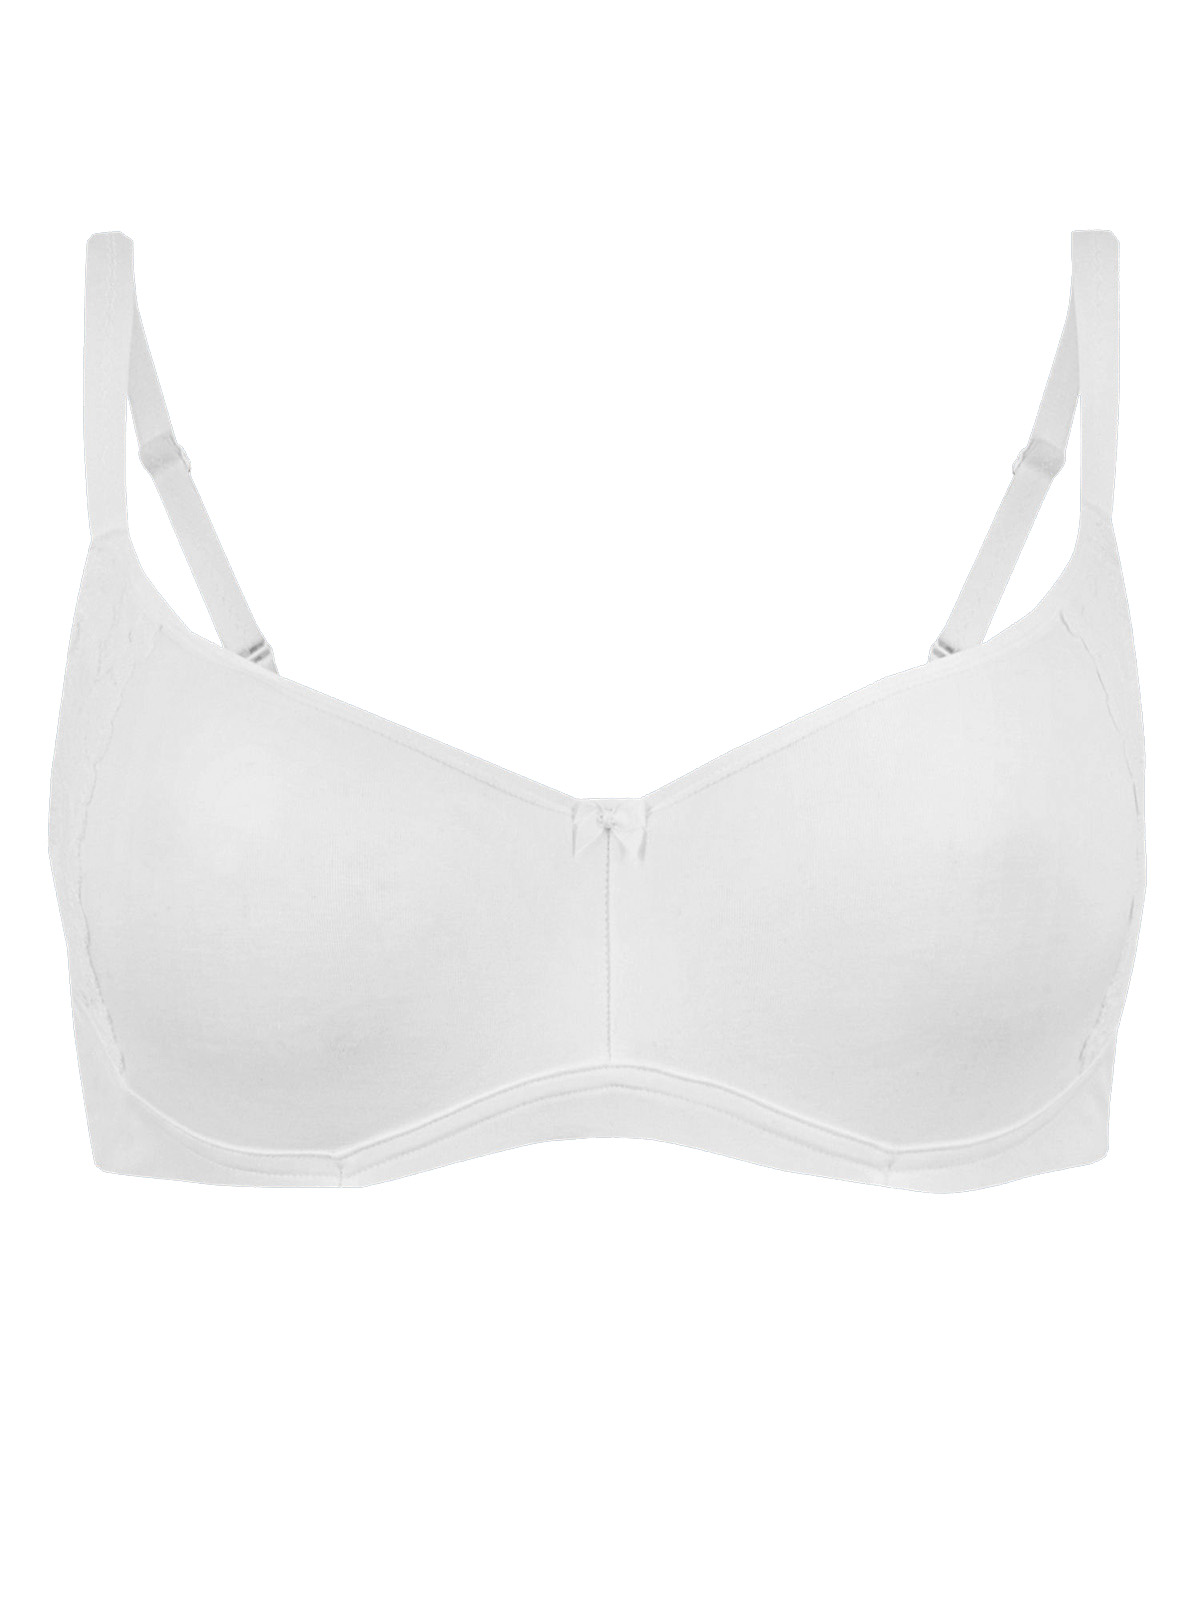  - - WHITE Cotton Rich Cool Comfort Smoothing Full Cup Bra